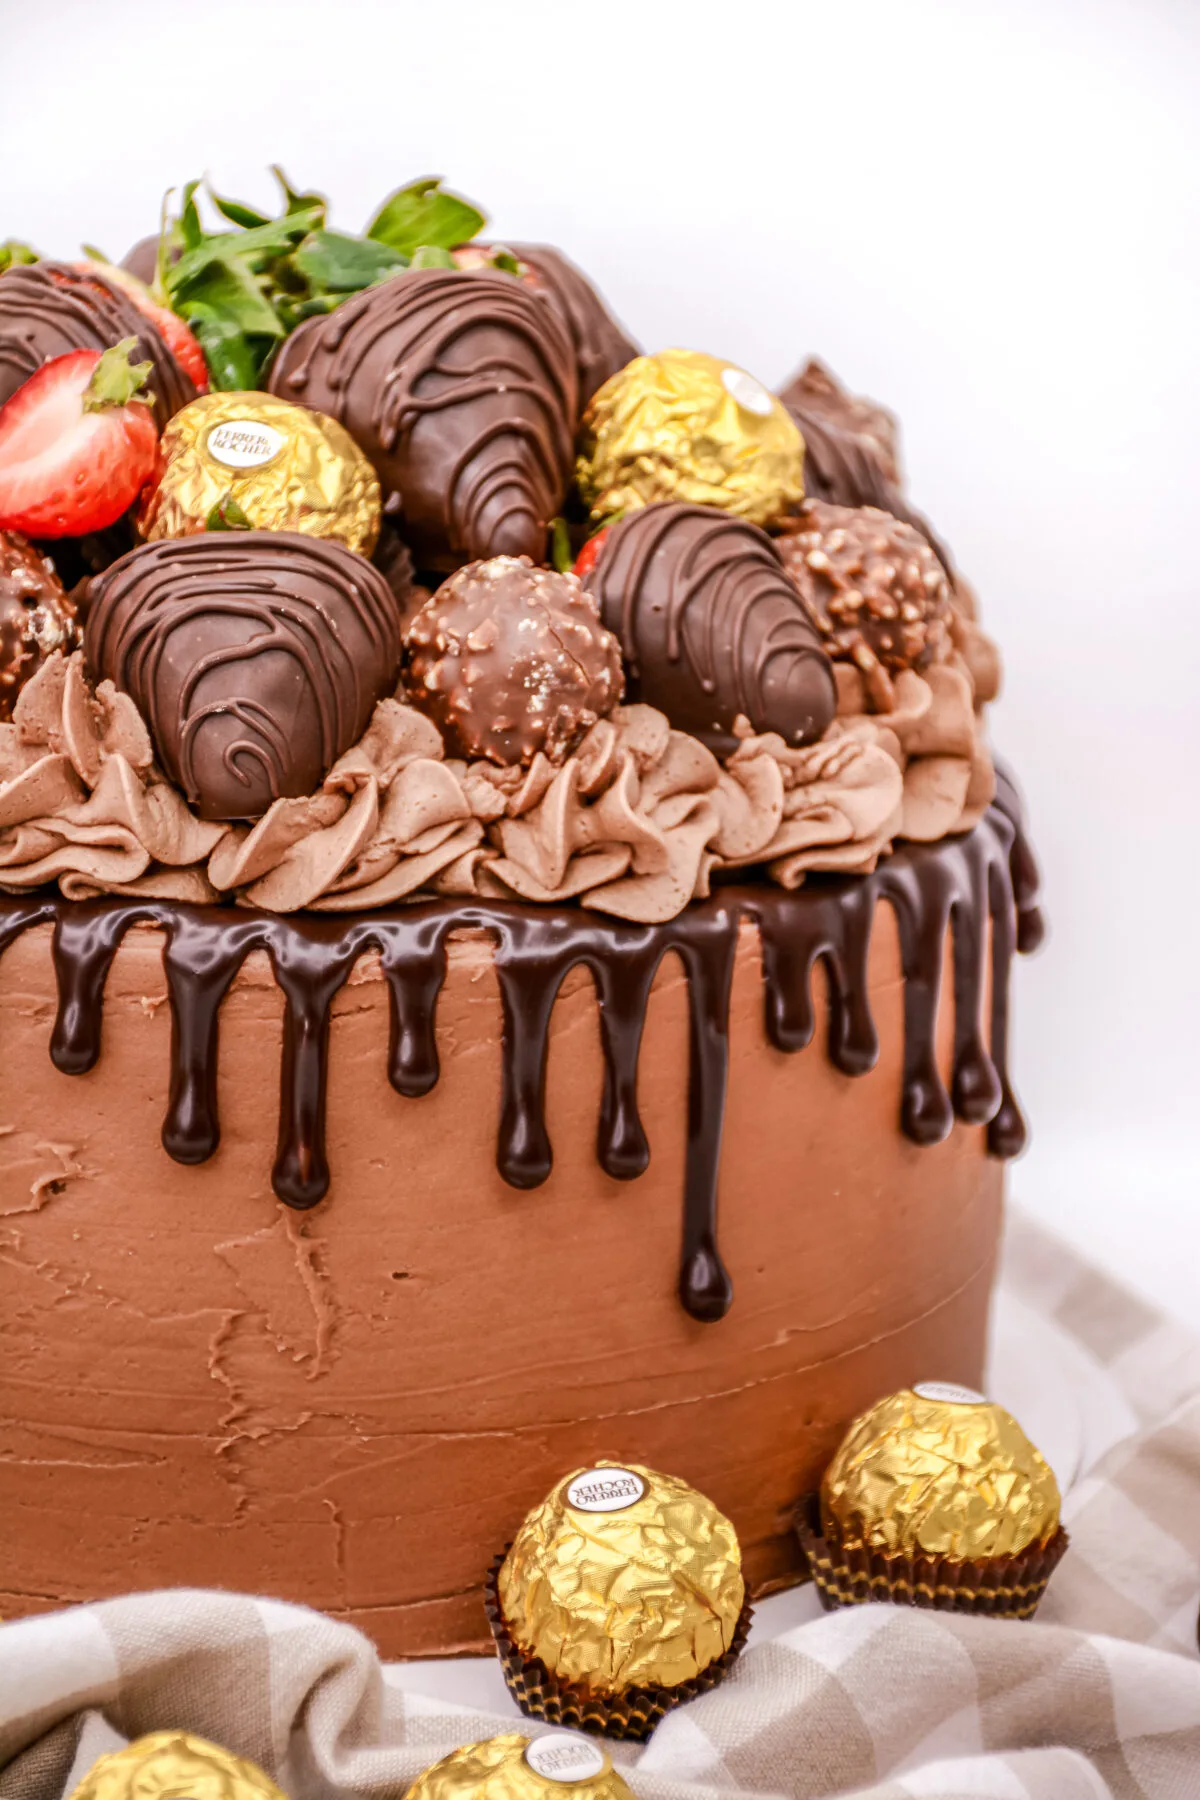 This layered chocolate strawberry cake is frosted with rich and velvety espresso buttercream, and topped with chocolate covered strawberries.